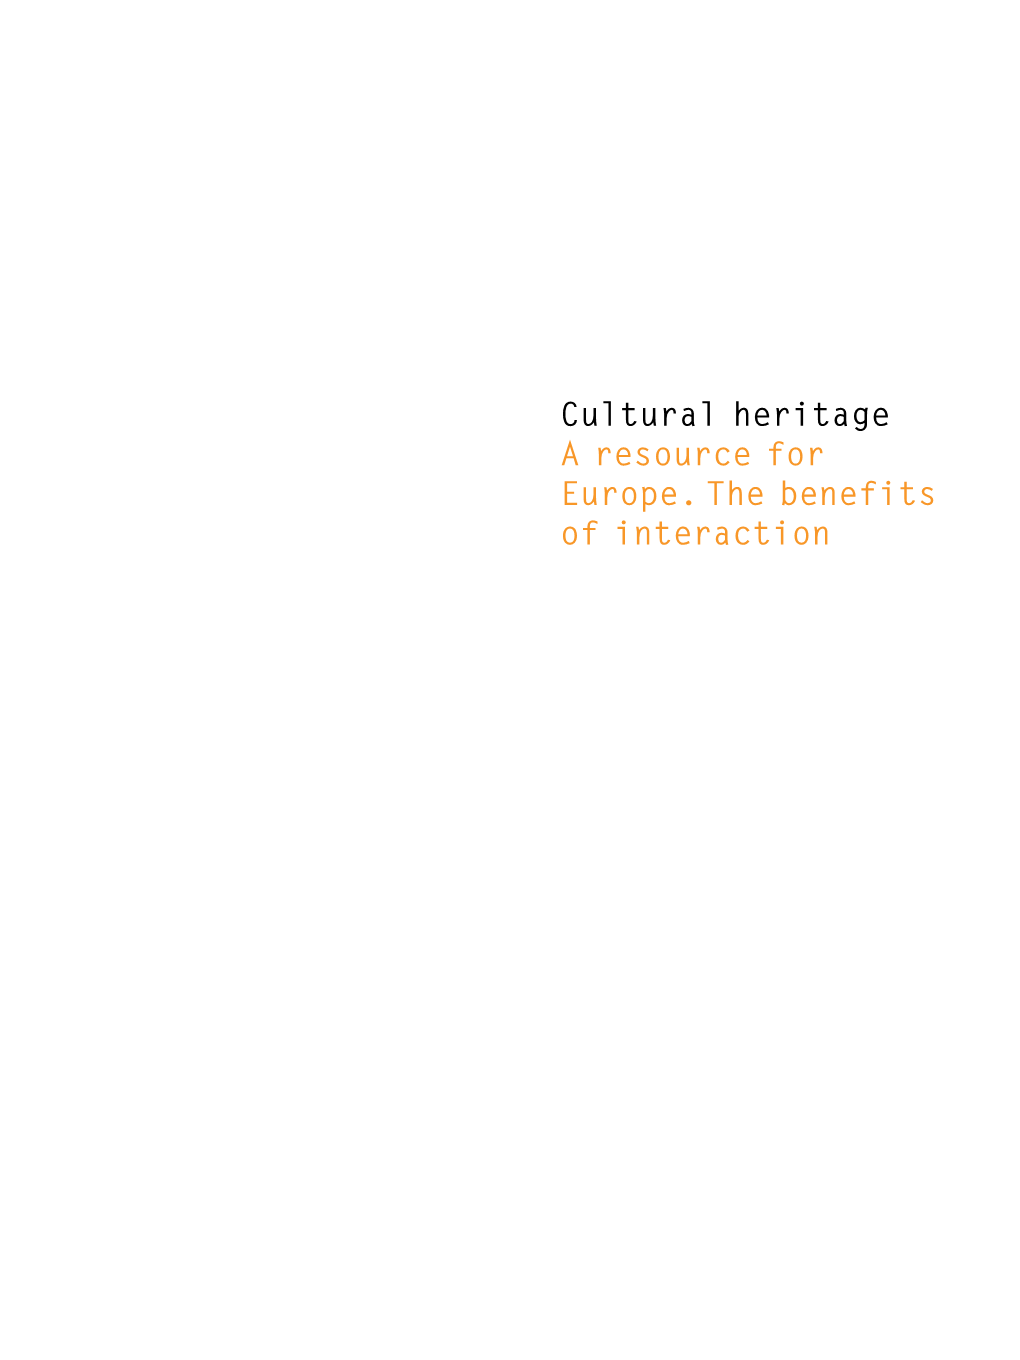 Cultural Heritage a Resource for Europe. the Benefits of Interaction